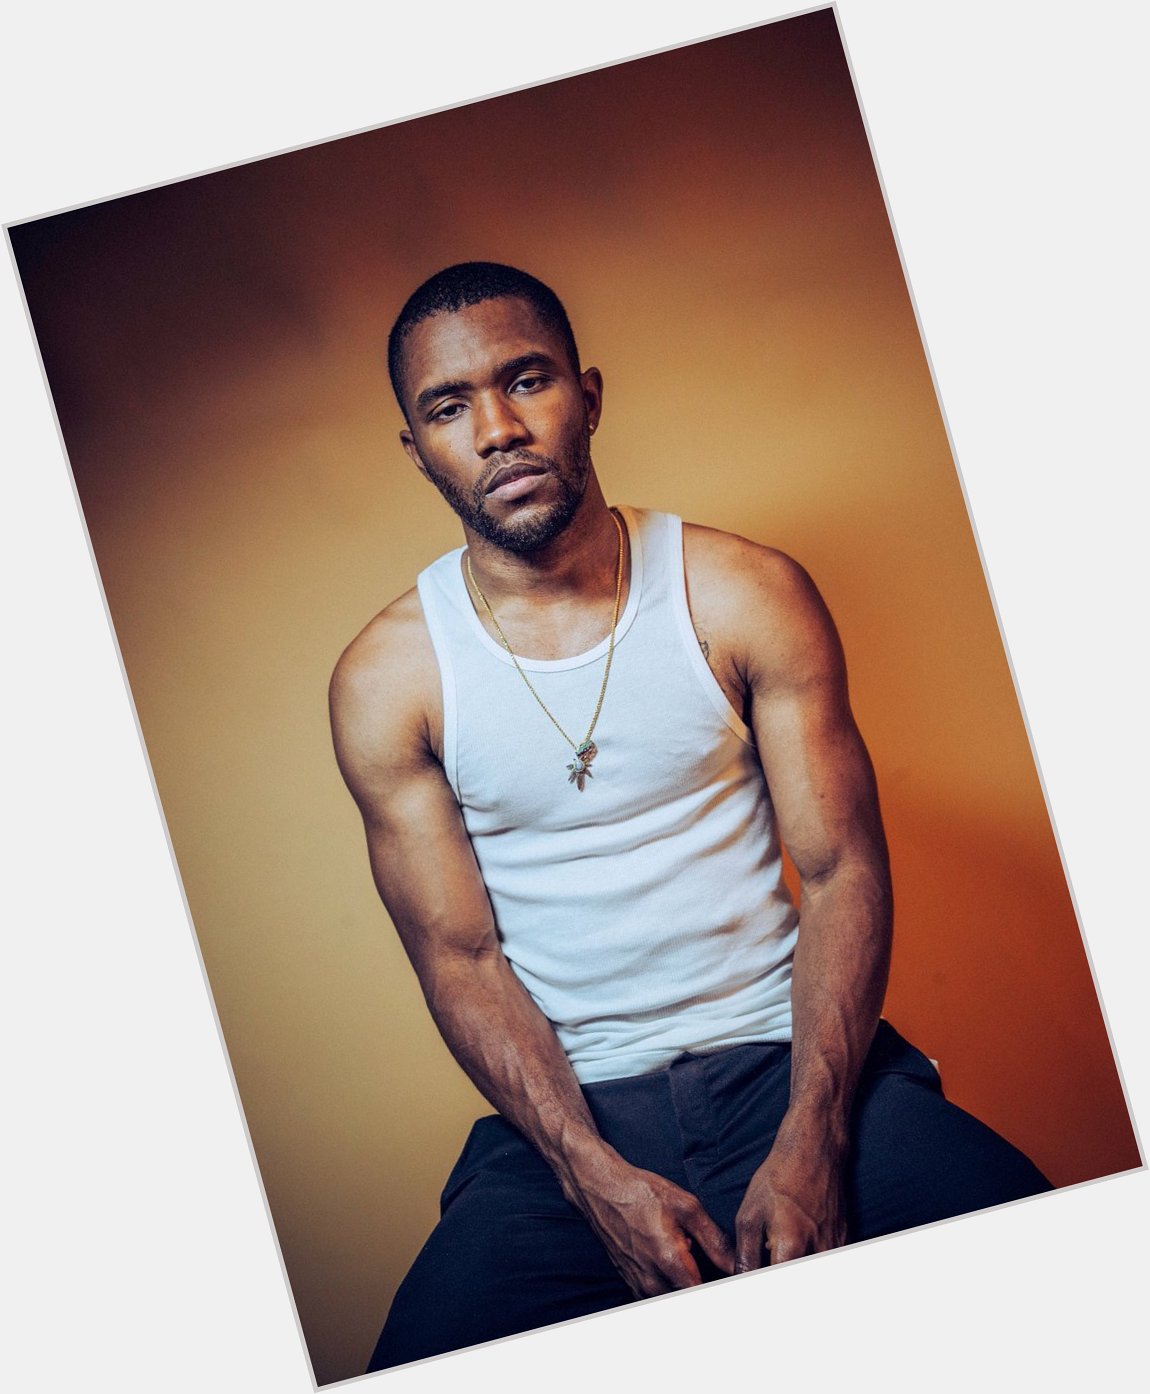 Happy 33rd birthday to the one and only Frank Ocean  Ready and waiting on new music... 